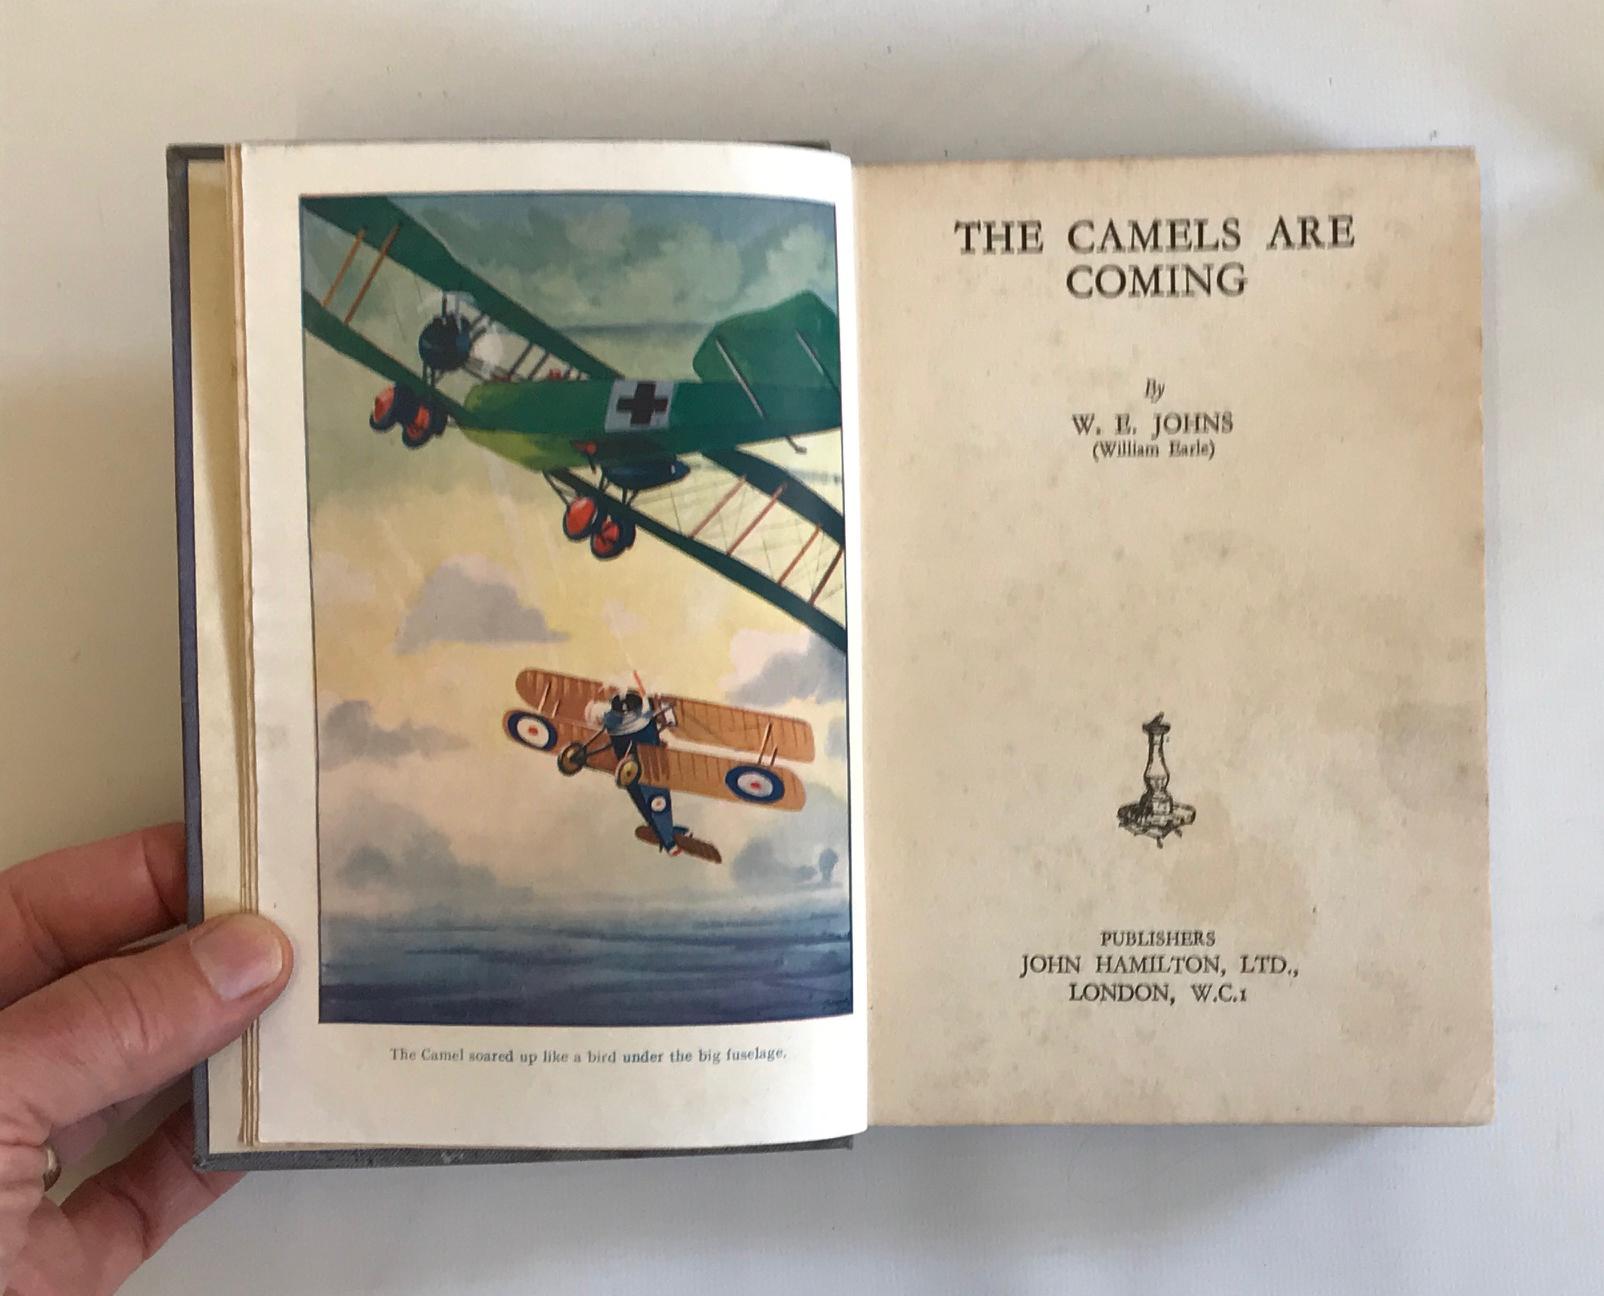 BIGGLES, THE CAMELS ARE COMING, [1934] W.E. Johns, John Hamilton; stained boards, faded spine, - Image 2 of 2